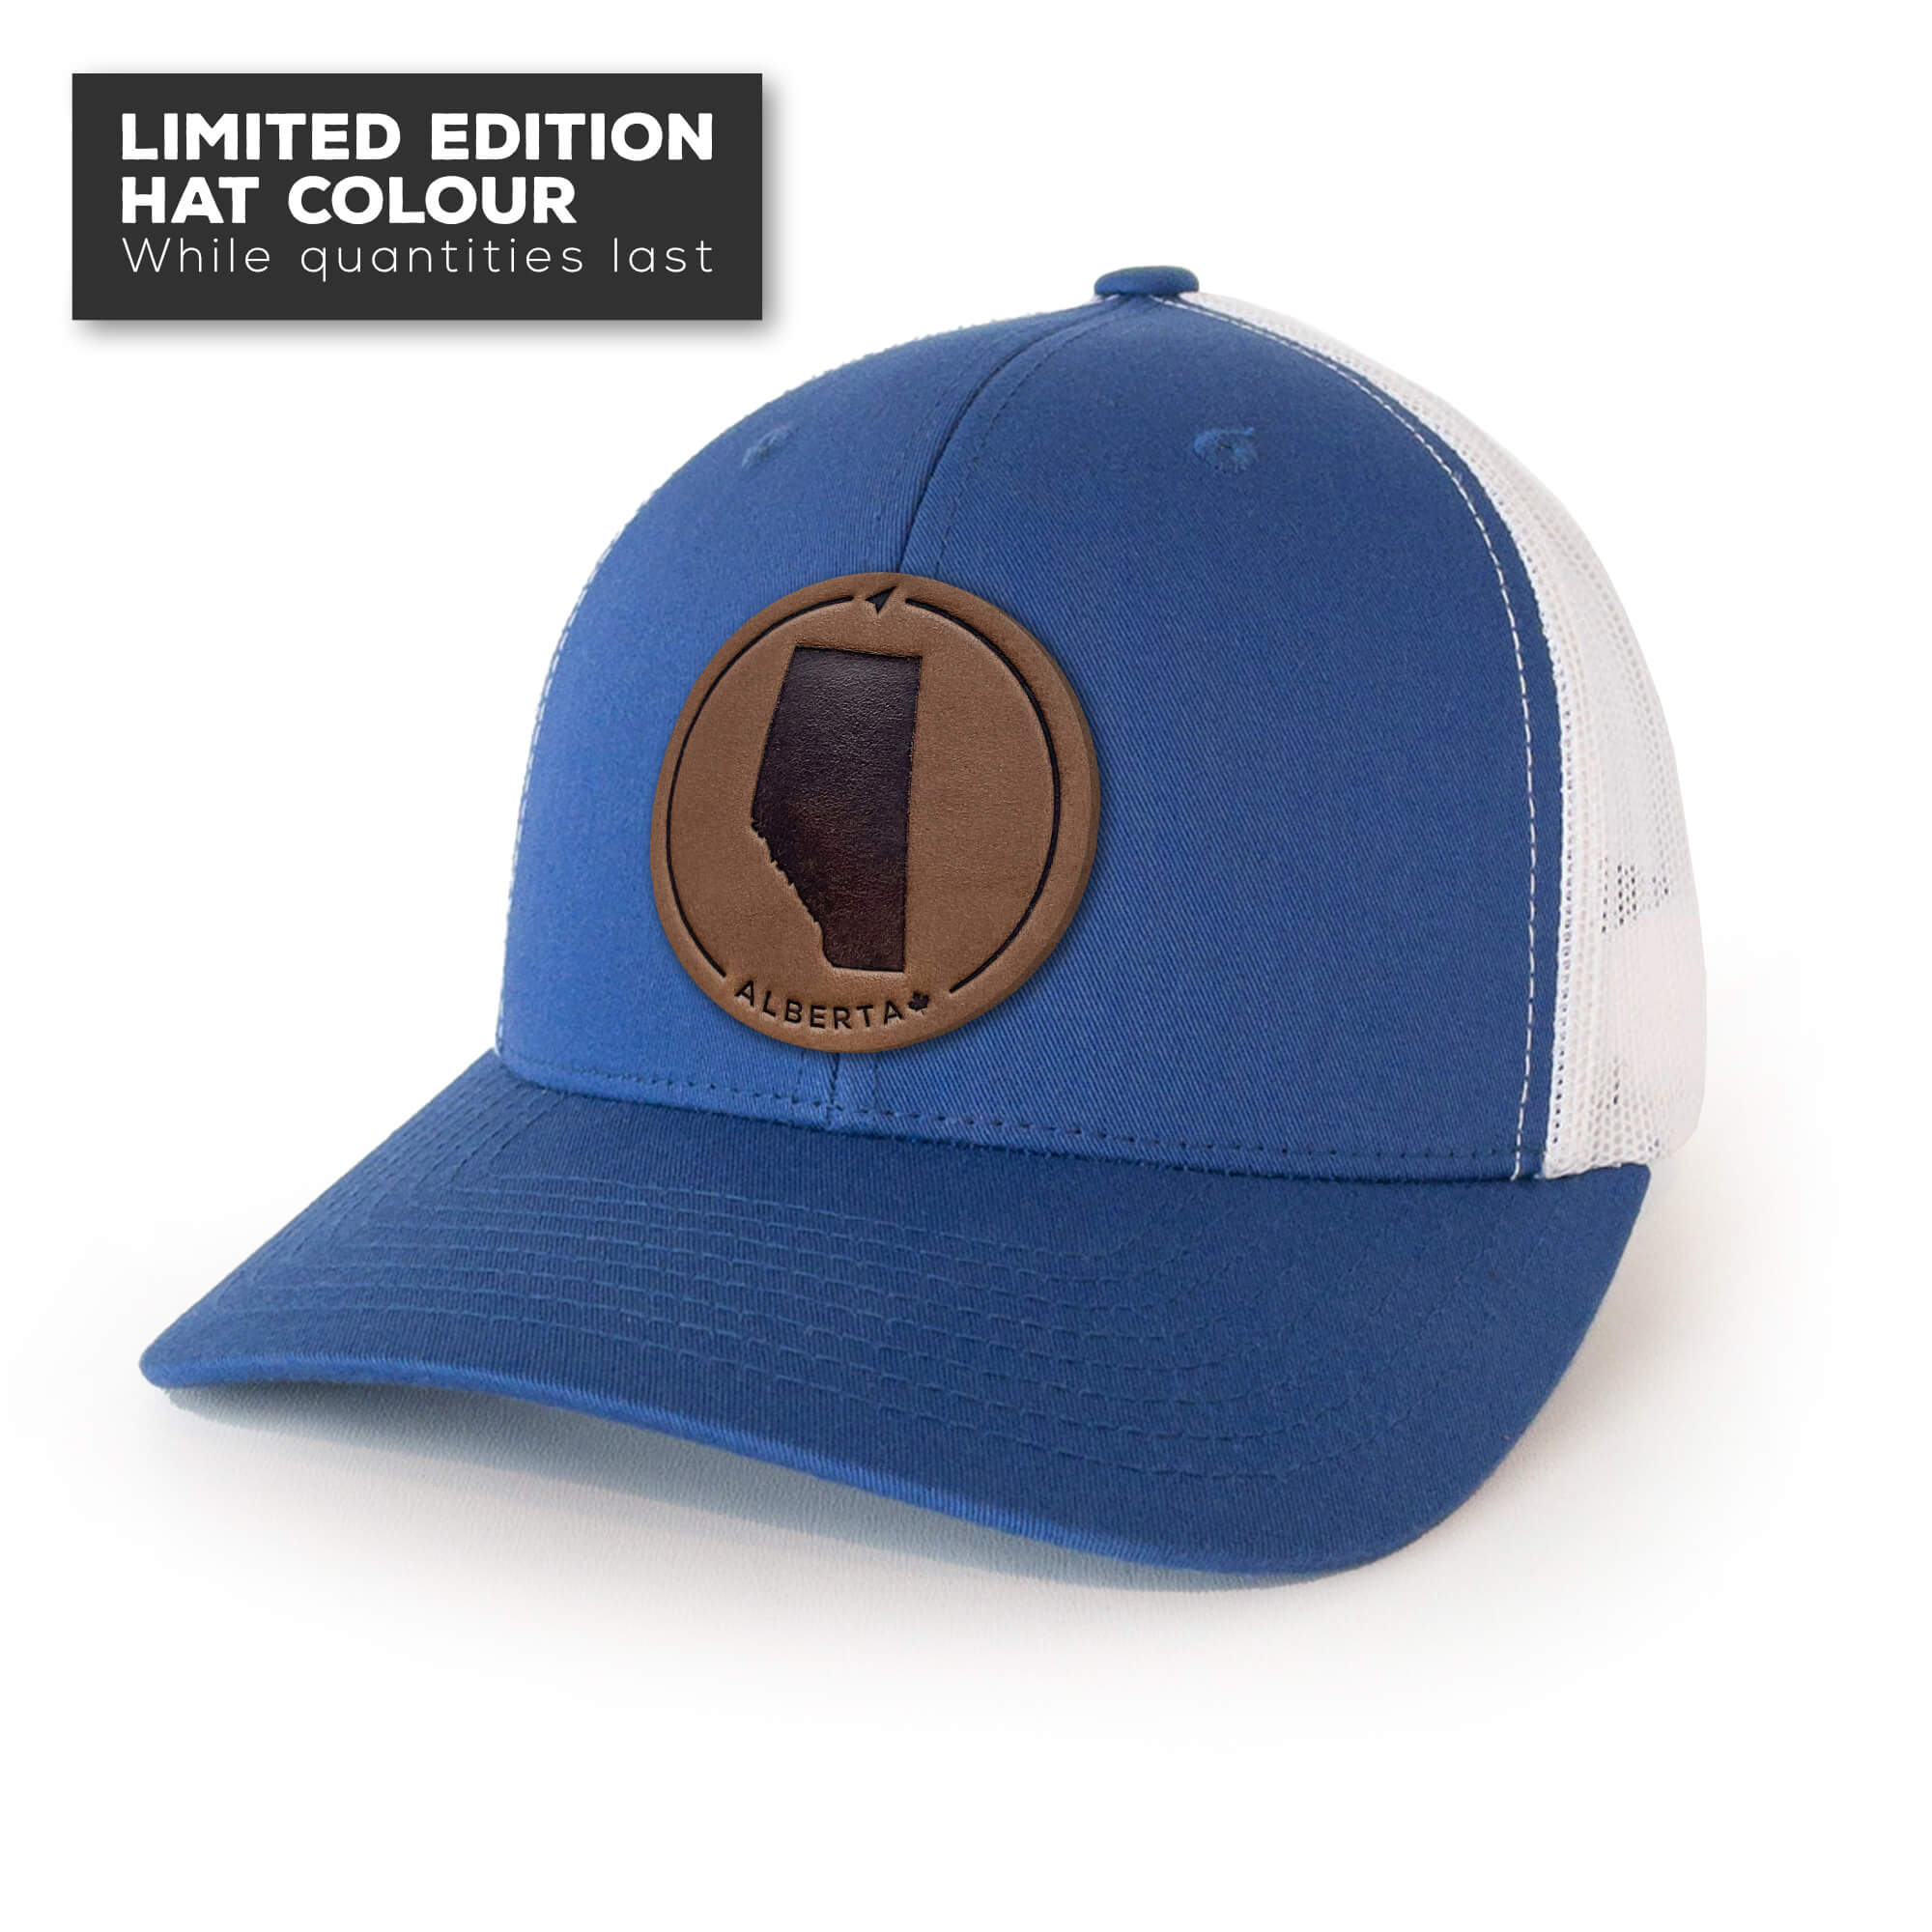 Royal Blue trucker hat with full-grain leather patch of Alberta